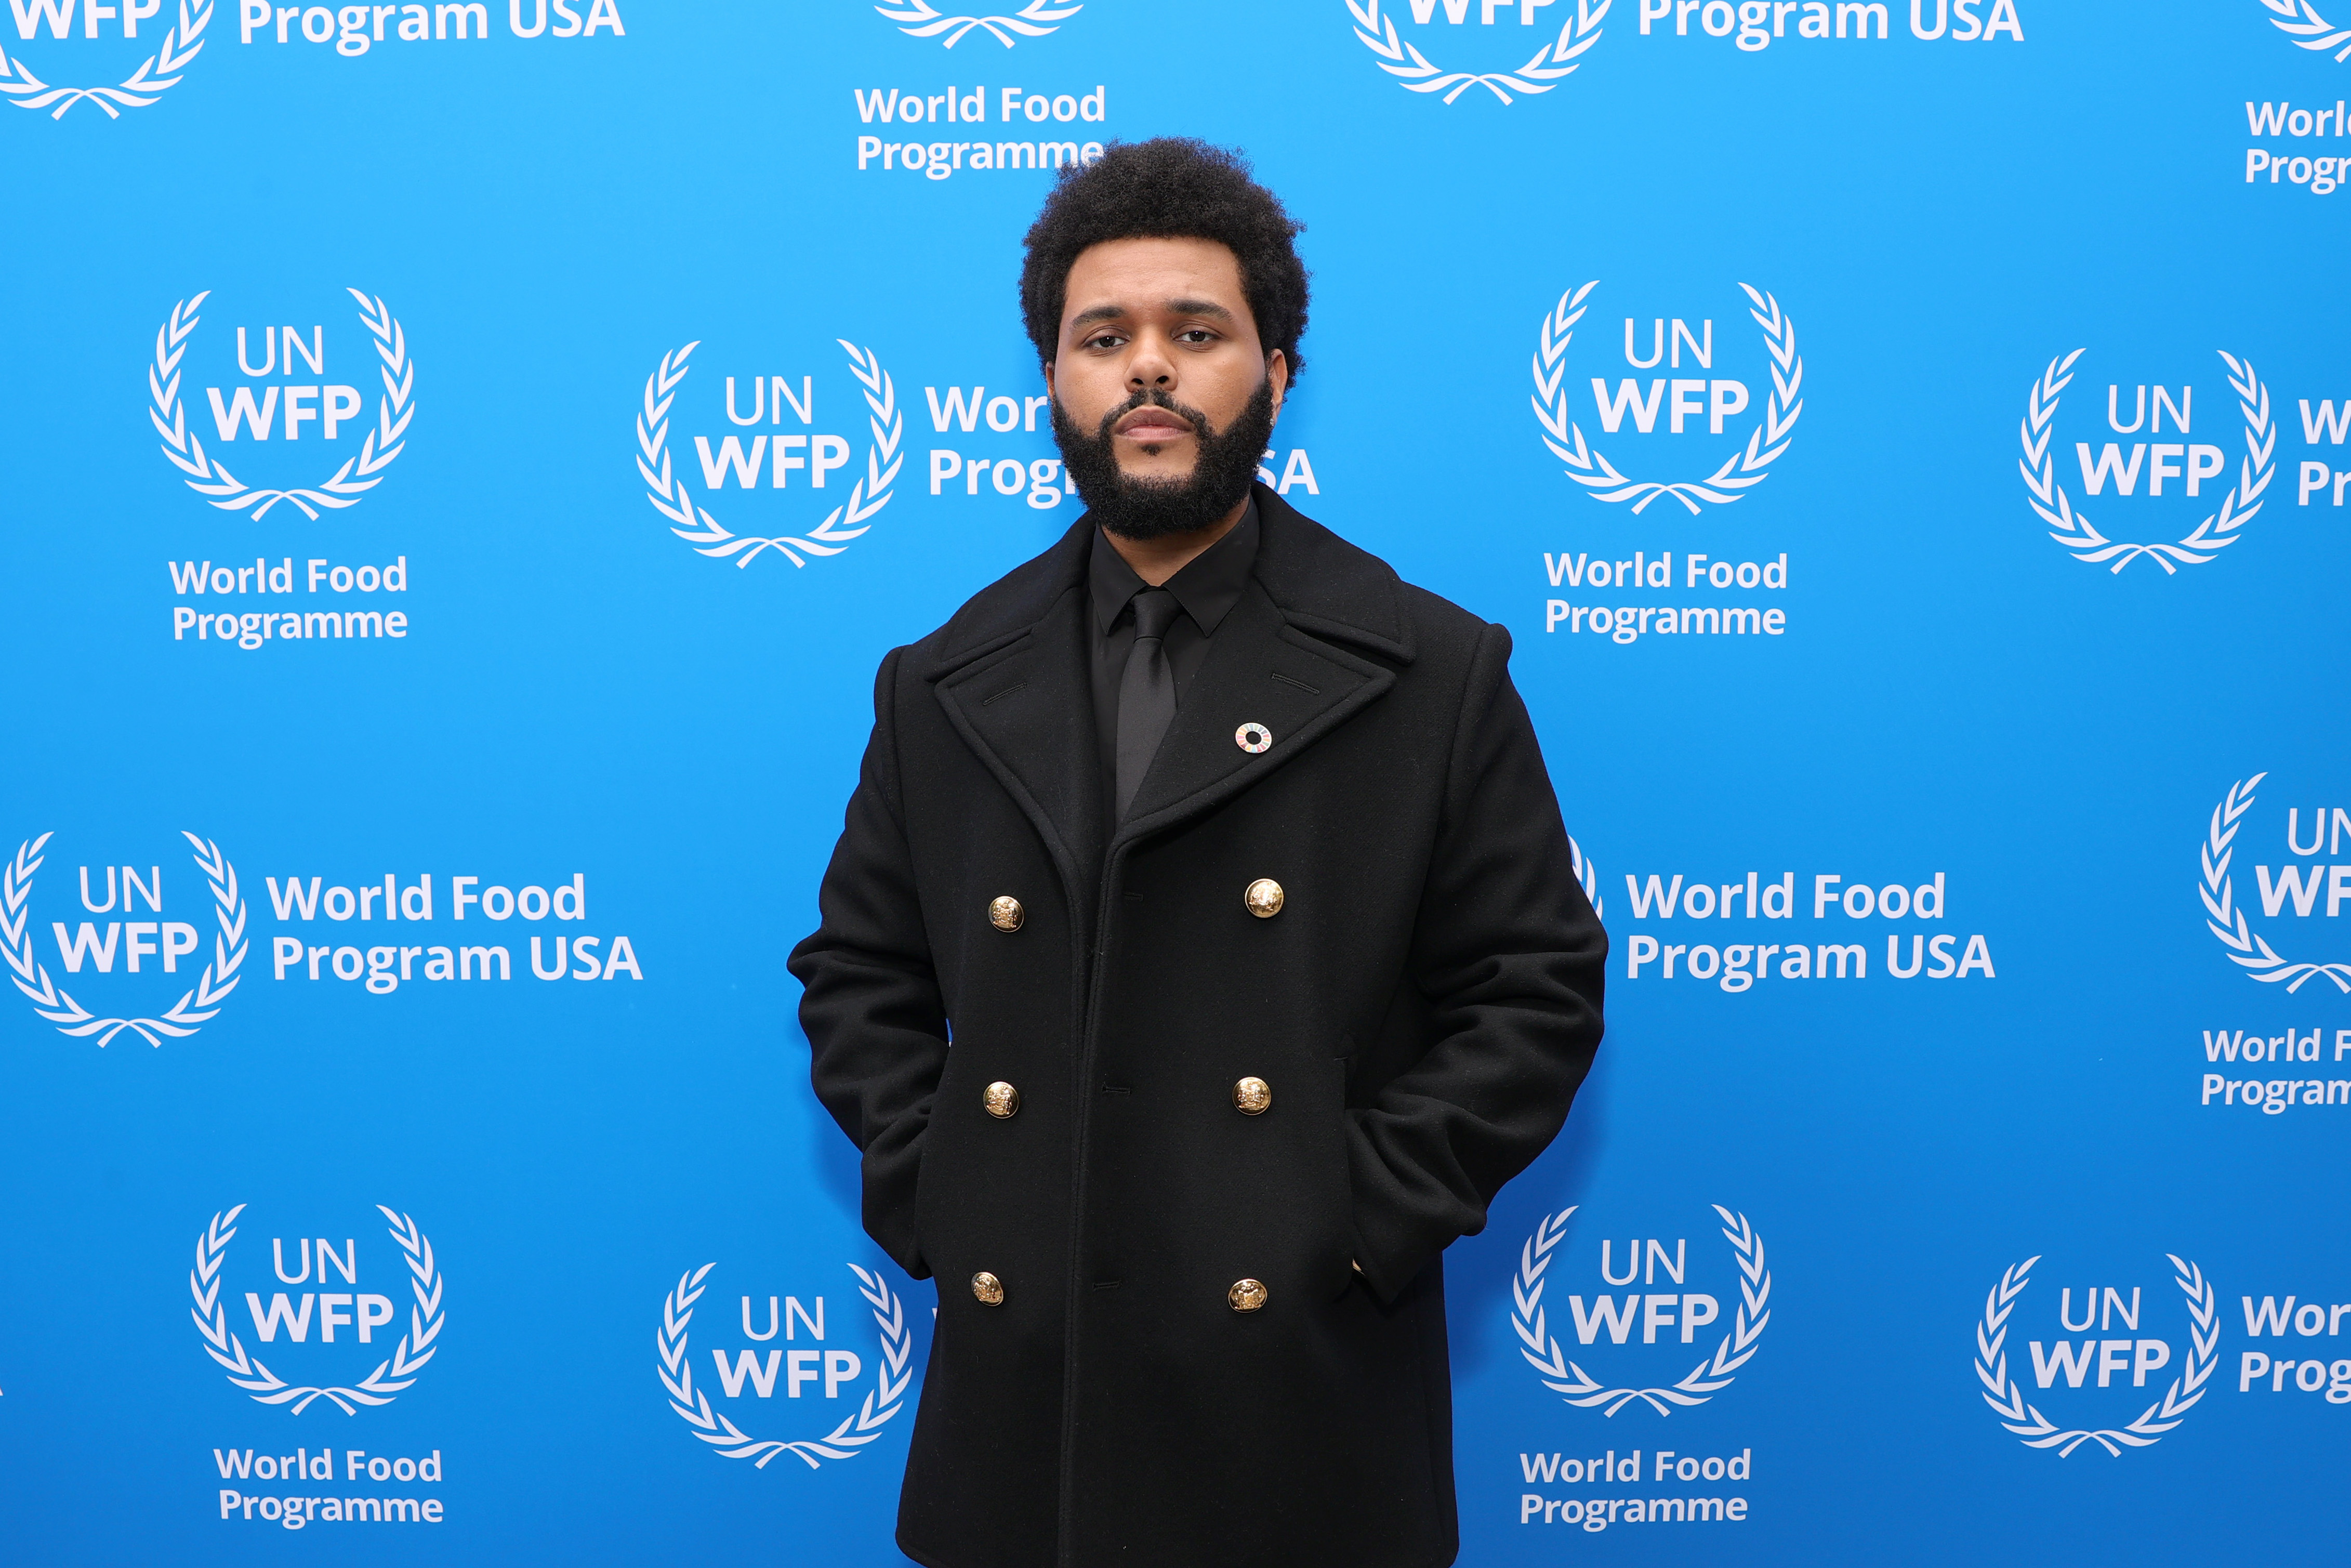 The Weeknd Postpones “Dawn FM” Announcement Following Overlap With Russia Invading Ukraine